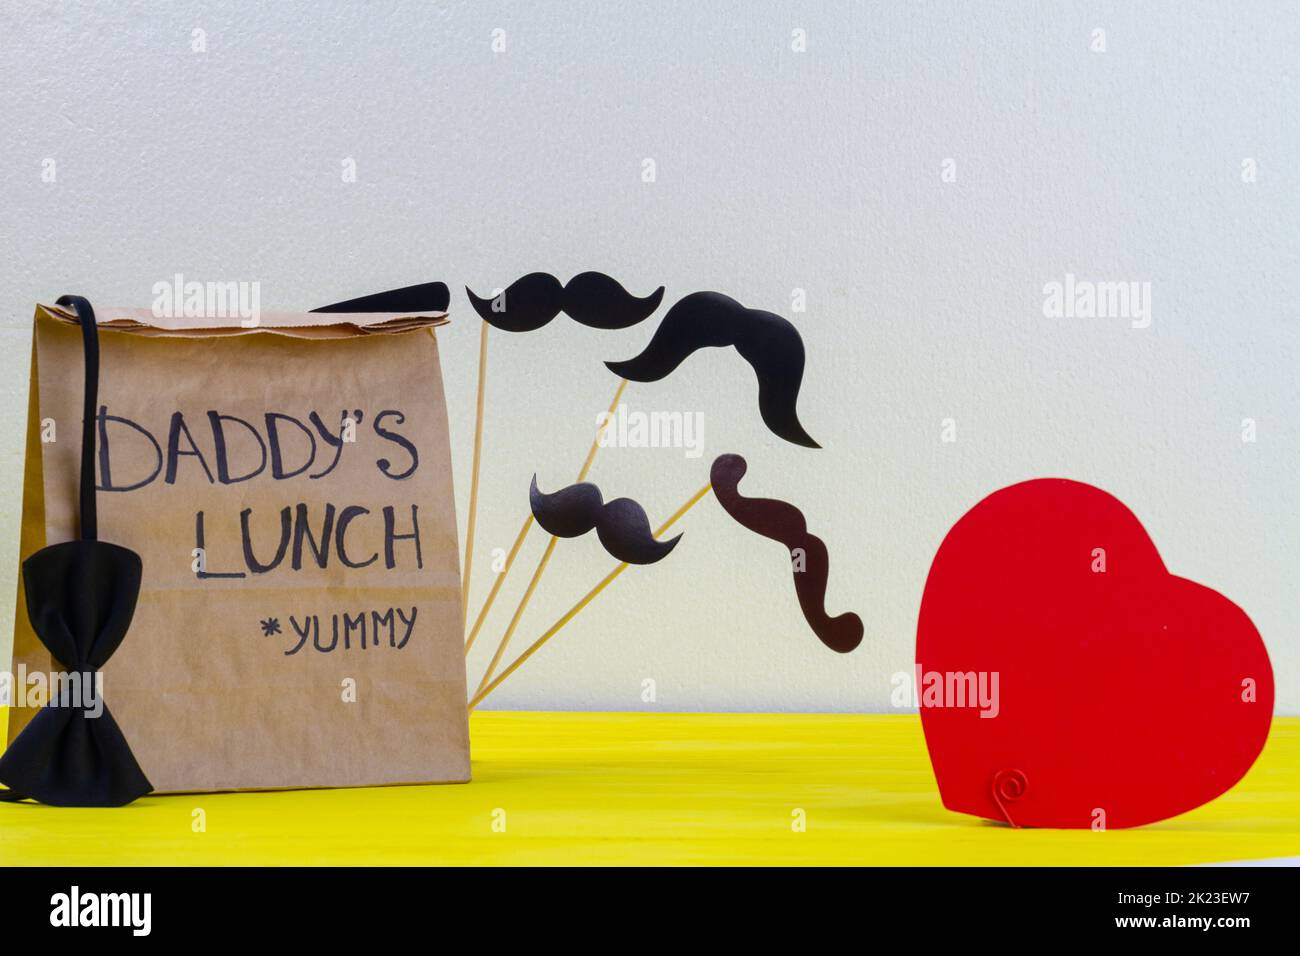 Paper bag for daddy on white background. Red heart and moustache. Stock Photo